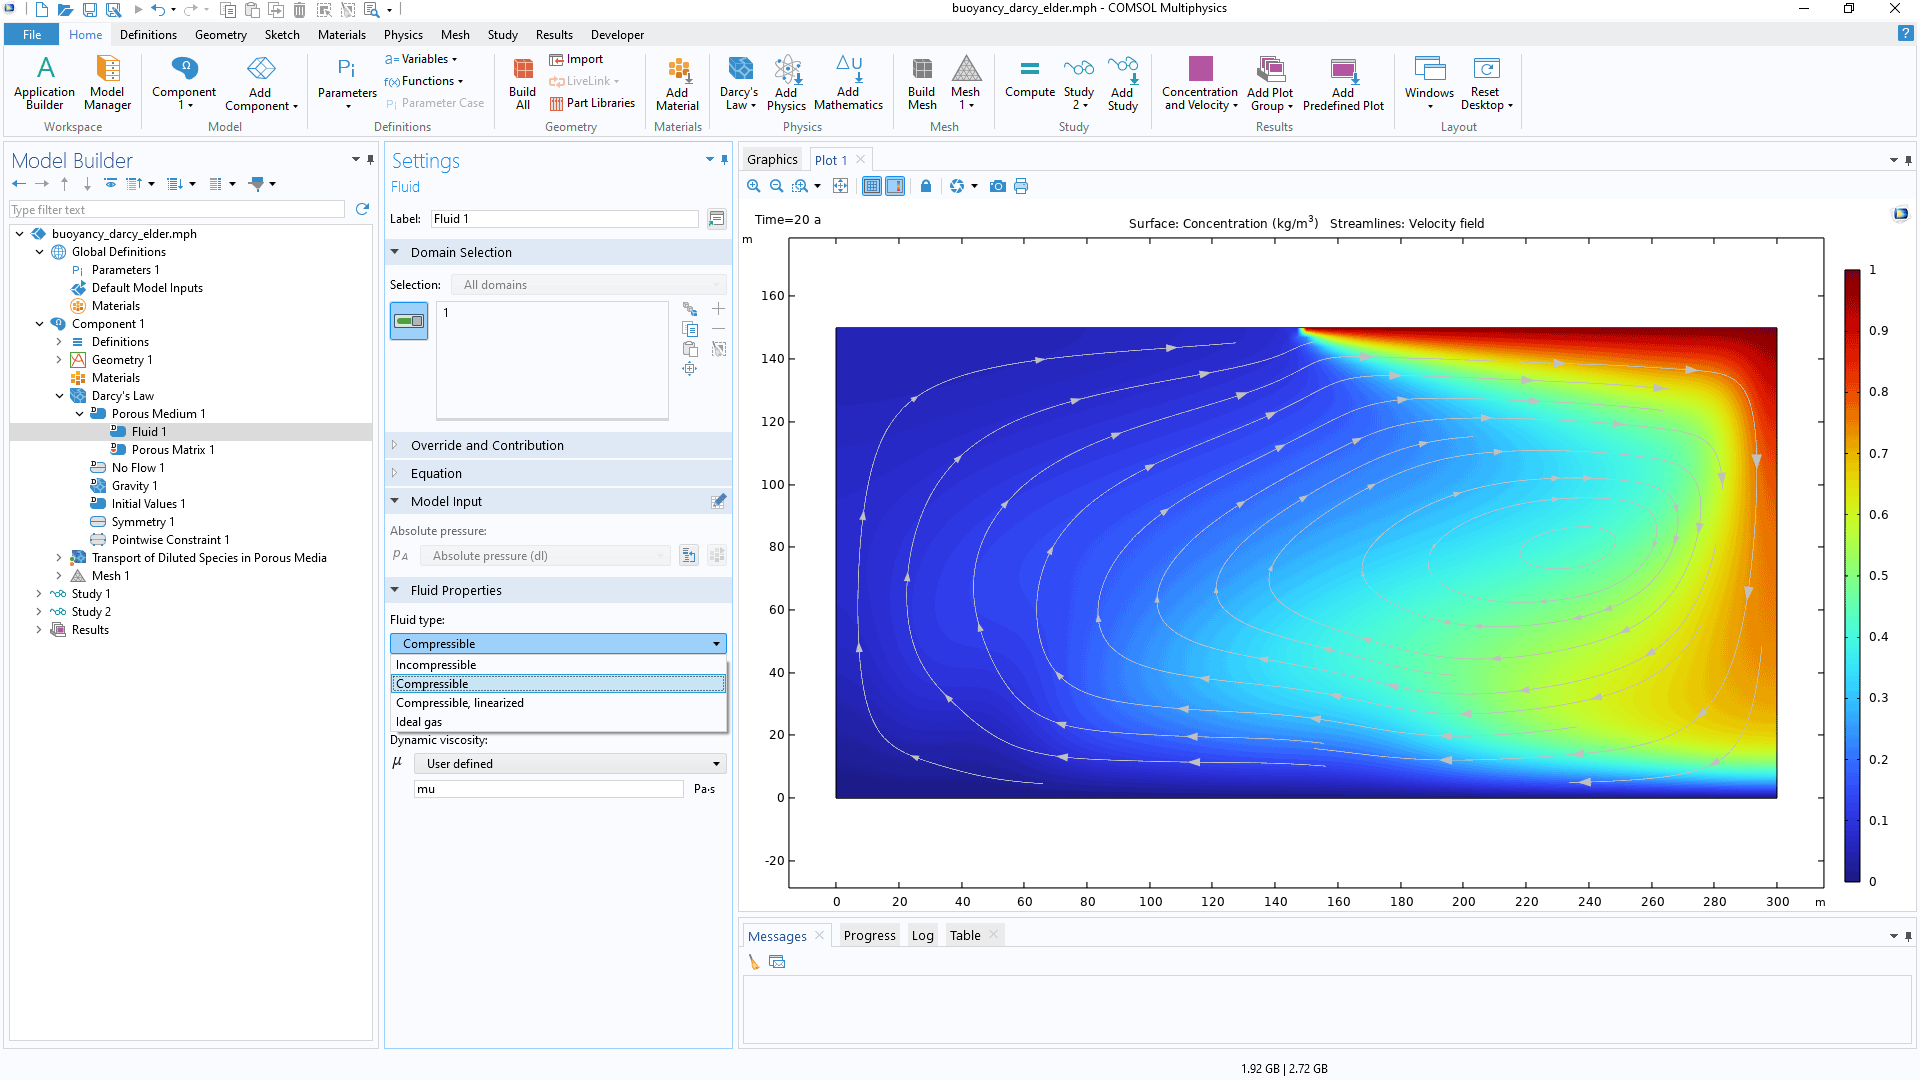 The COMSOL Multiphysics UI showing the Model Builder with the Fluid node highlighted, the corresponding Settings window, and a buoyancy flow model in the Graphics window.